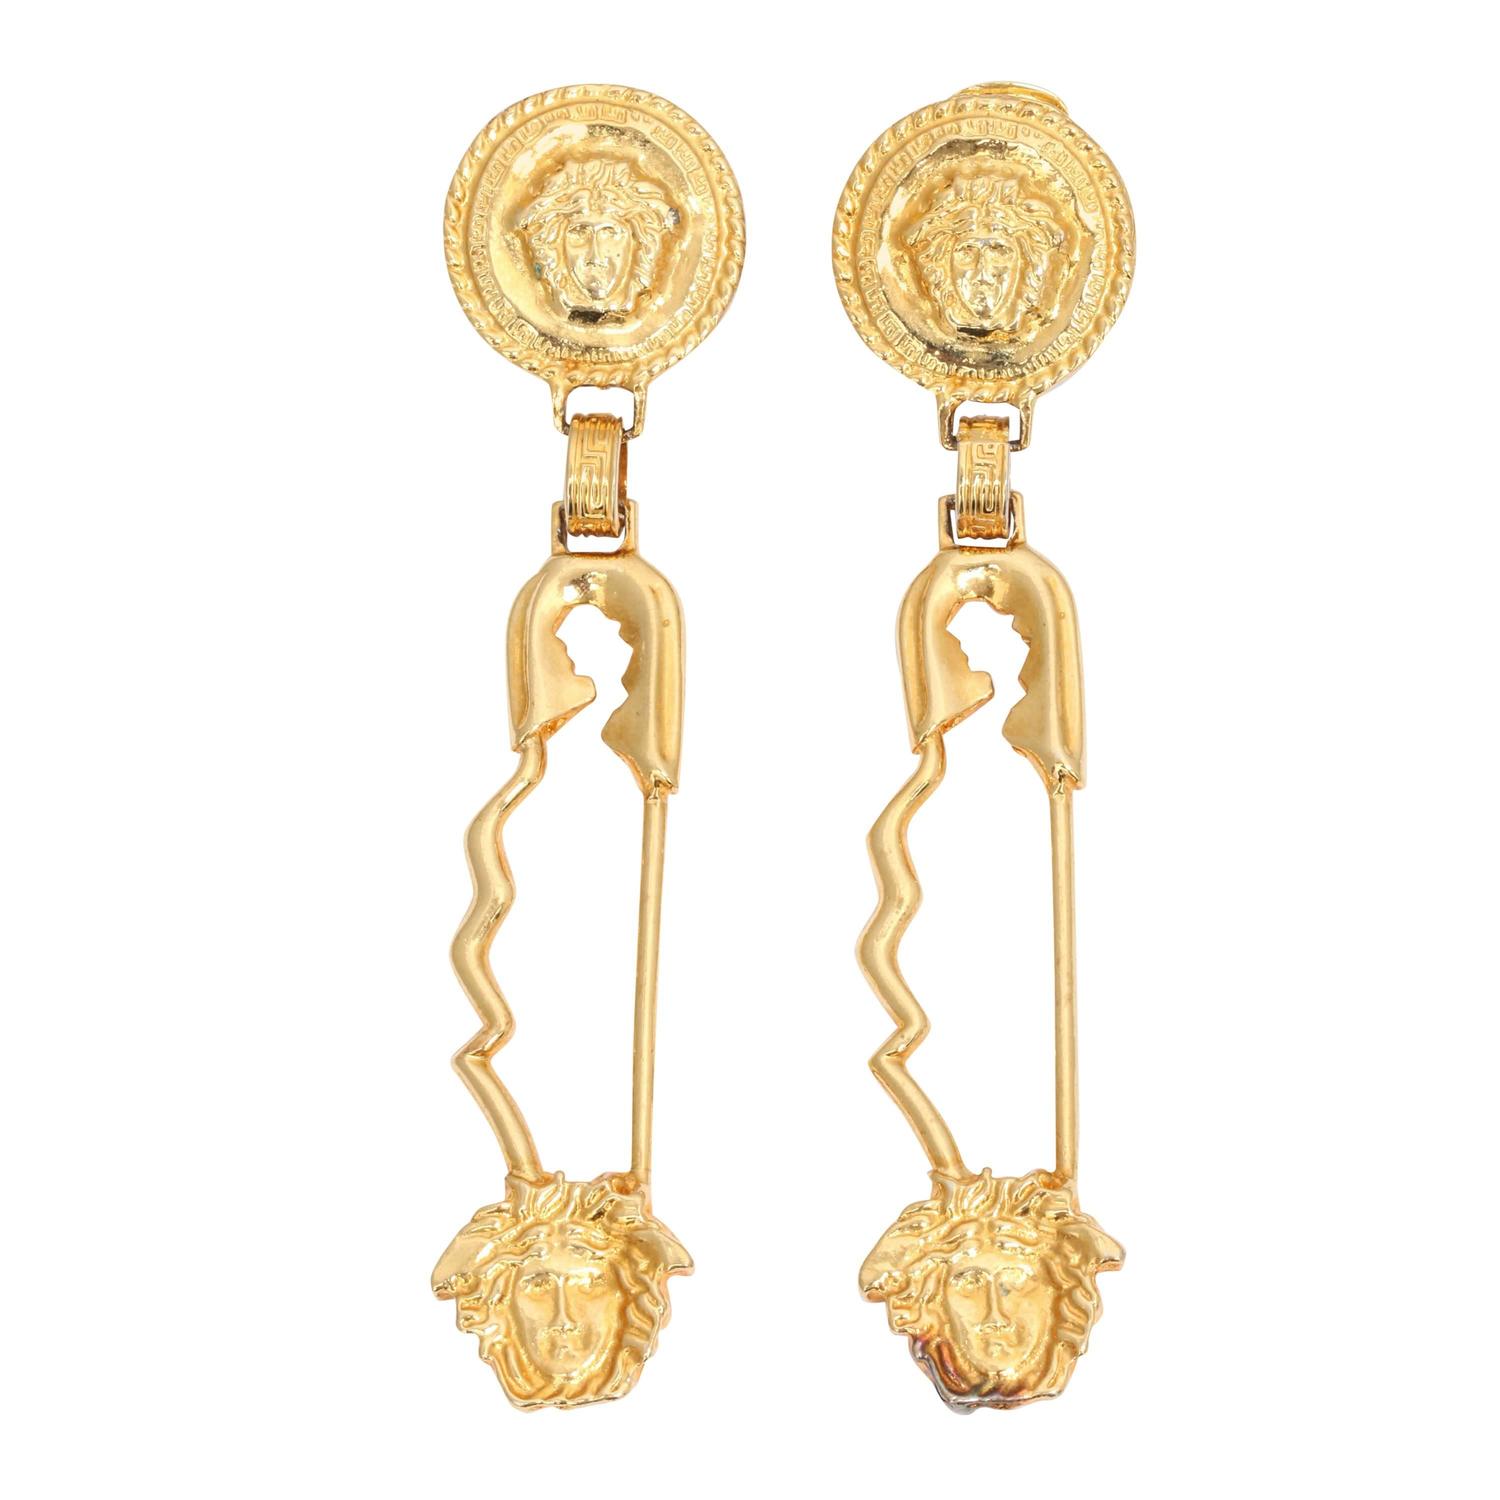 Rare Gianni Versace Large Safety Pin Earrings at 1stdibs